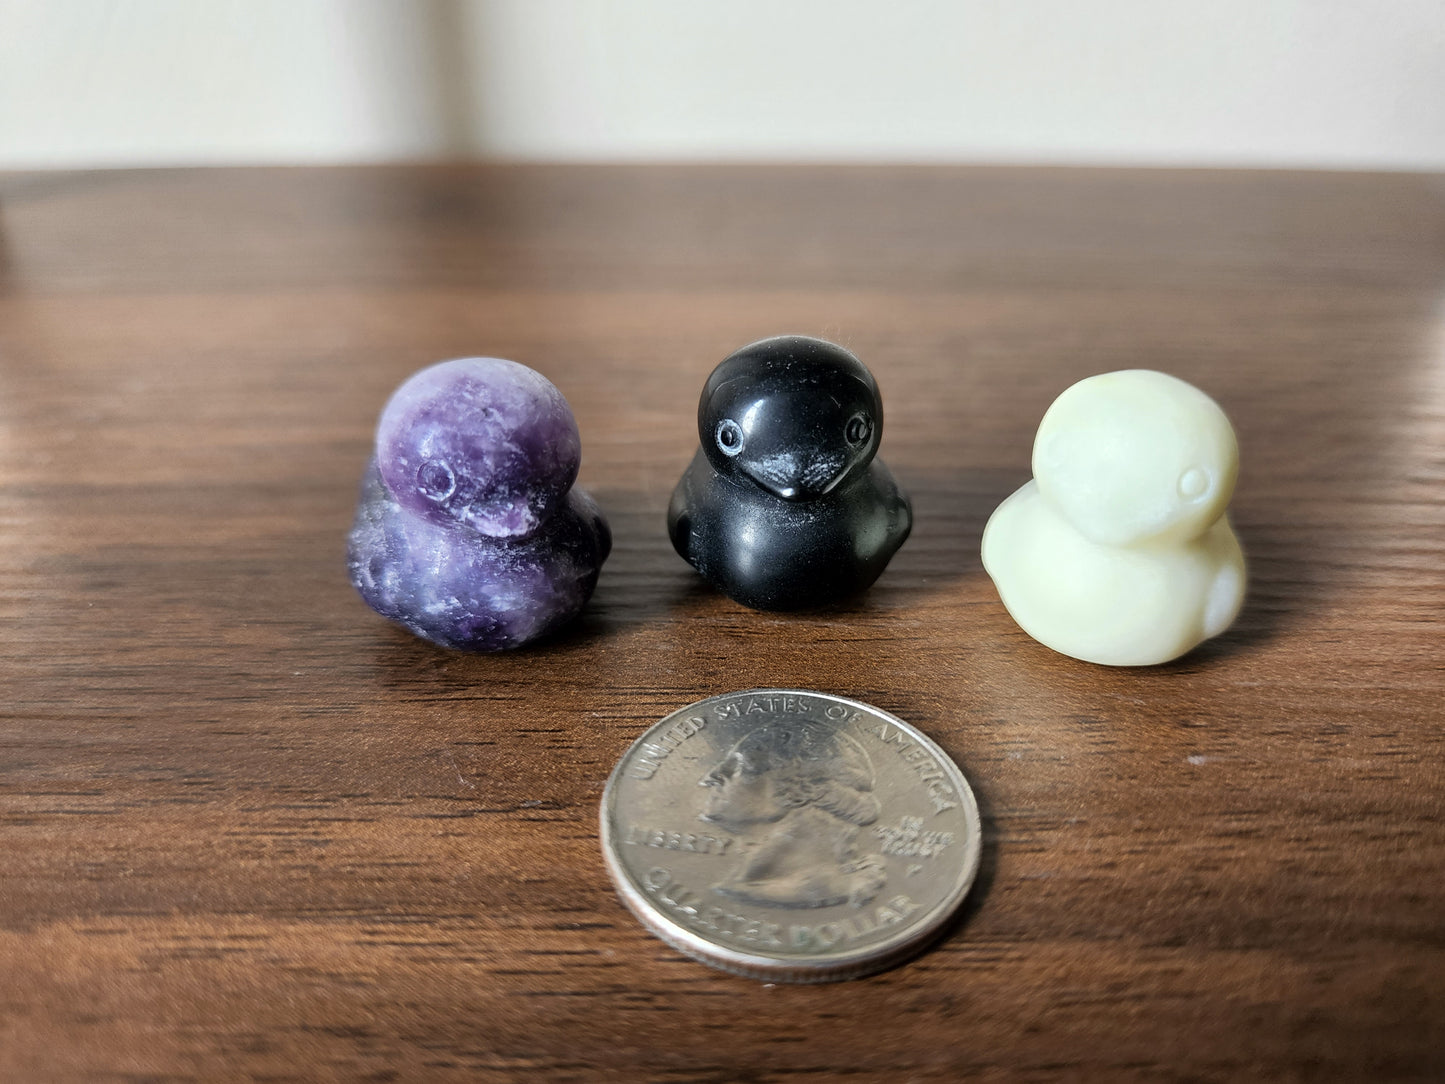 Mini Rubber Duck Carving